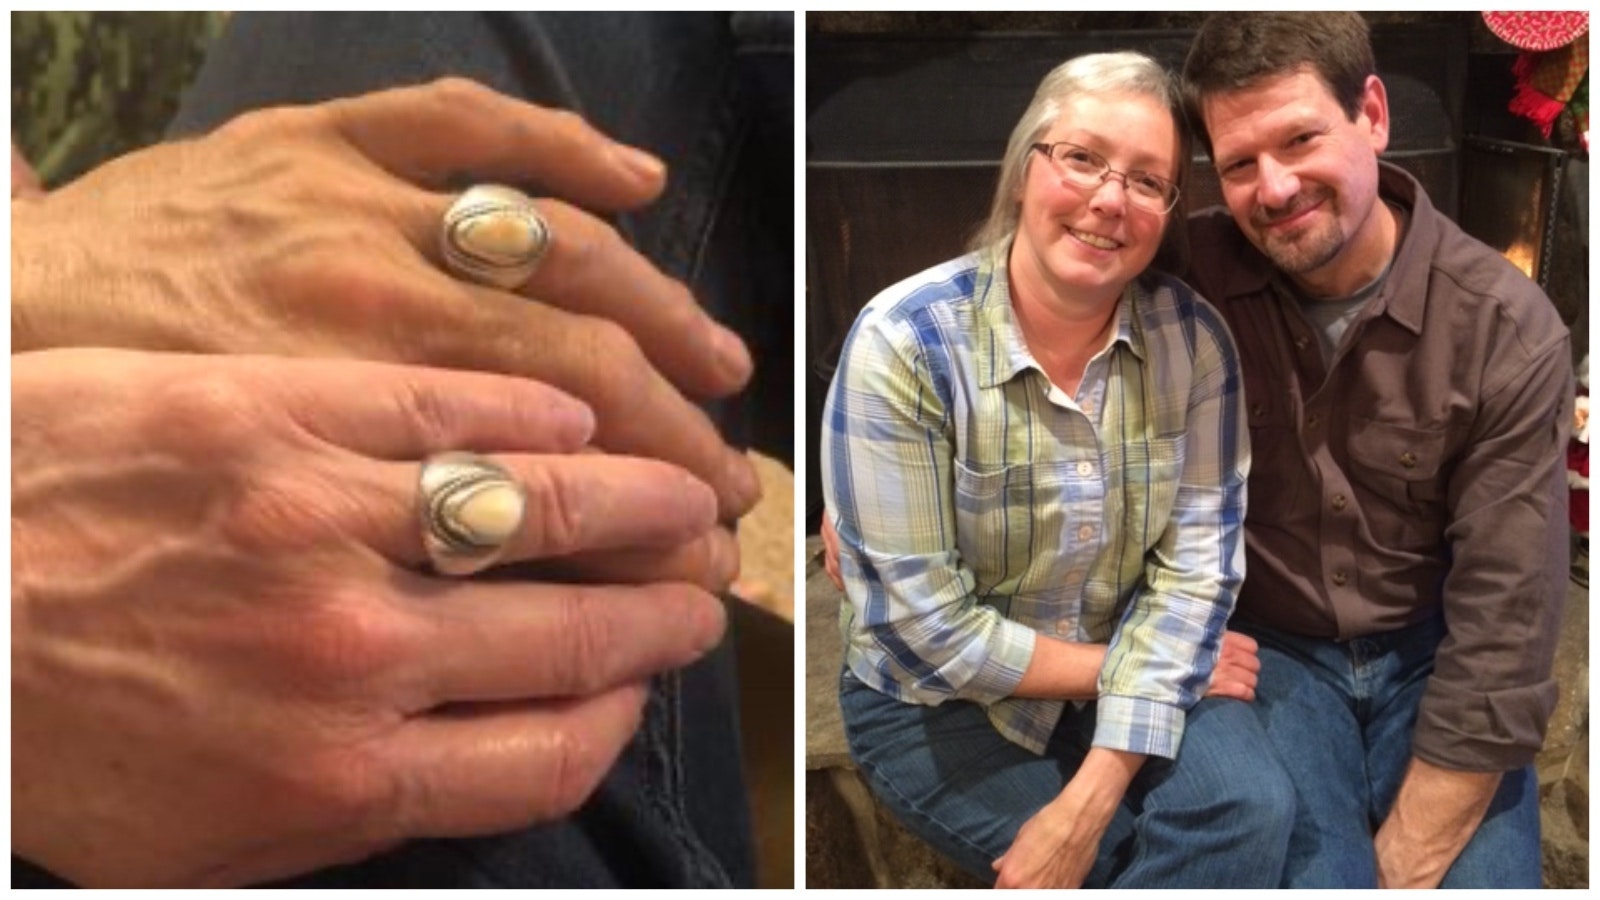 Teri and Randy Rowland of Sheridan are happy to have Teri’s wedding ring back. The couple have been married for 25 years, and she lost hers last Sunday at an exit along I-25. Against all odds, she got it back.